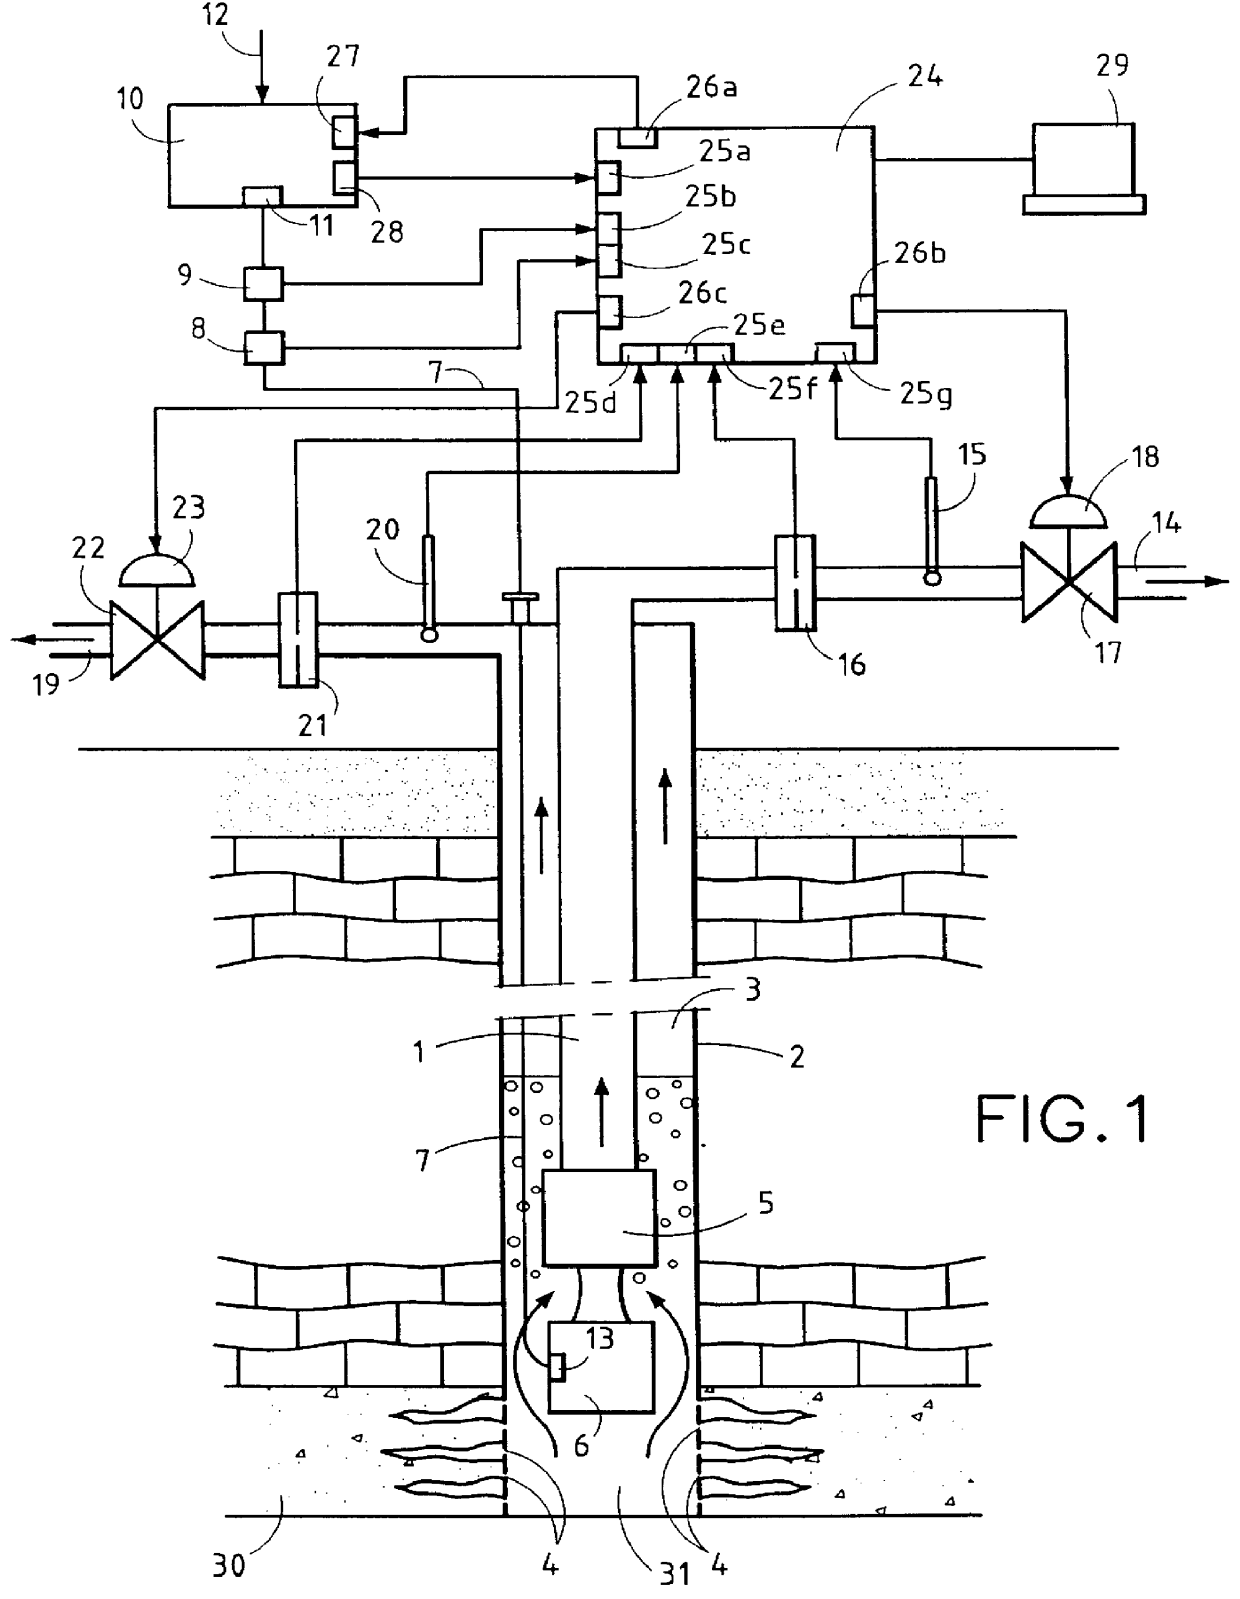 Method of operating an oil and gas production well activated by a pumping system